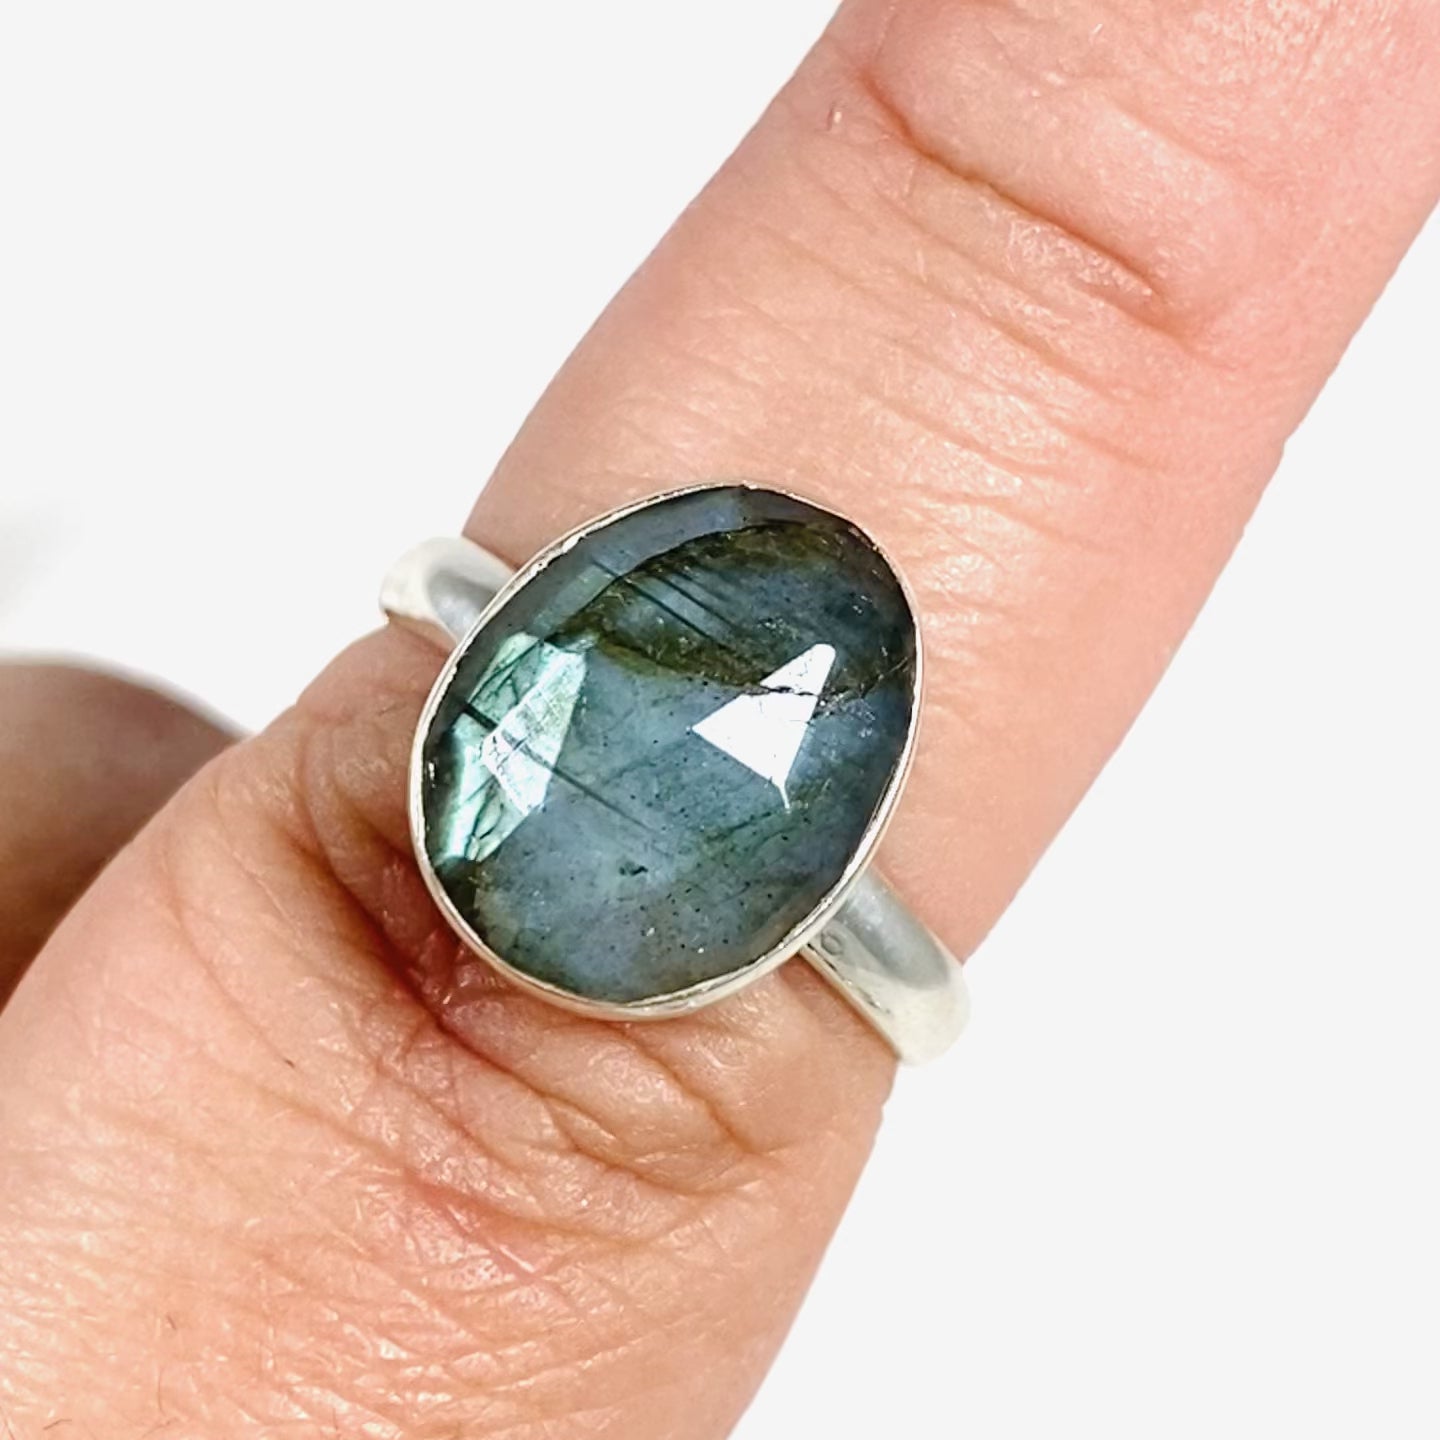 Blue iridescent Labradorite faceted gemstone and silver ring on a finger